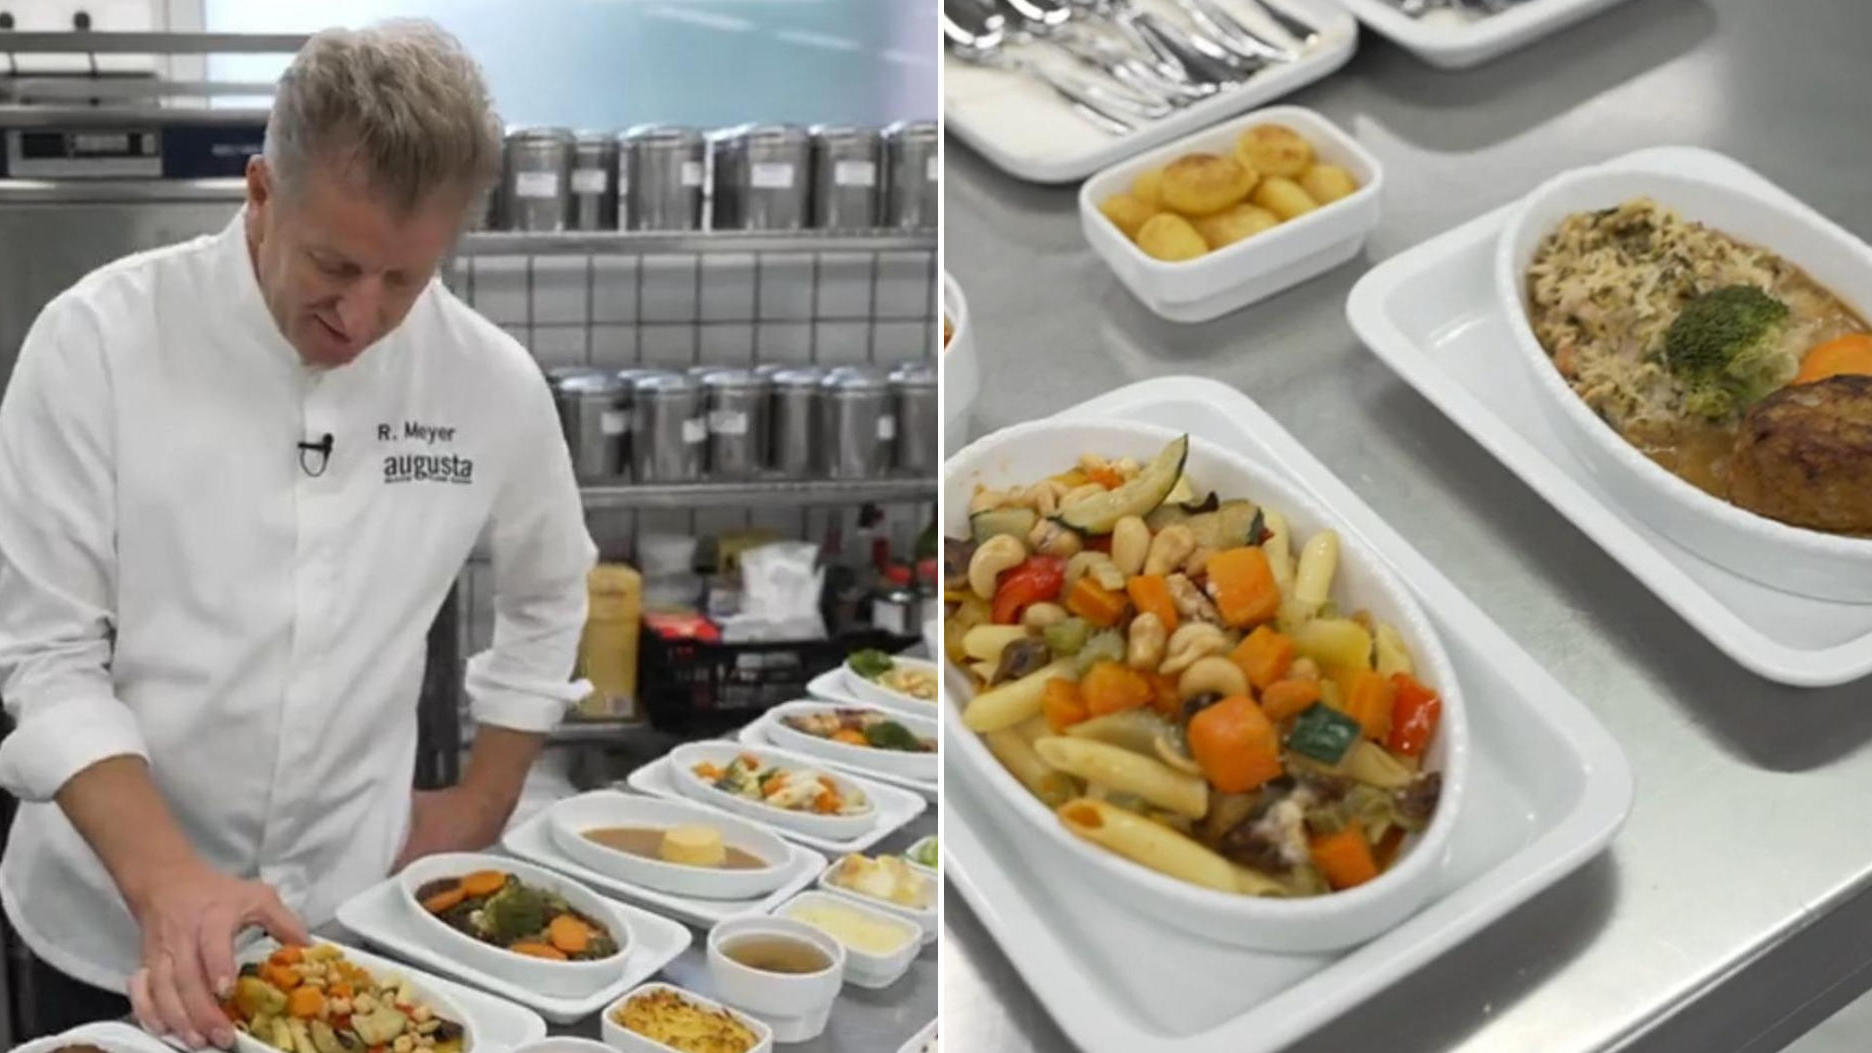 Do celebrity chefs cook fresh, high-quality, inexpensive food in German hospitals?